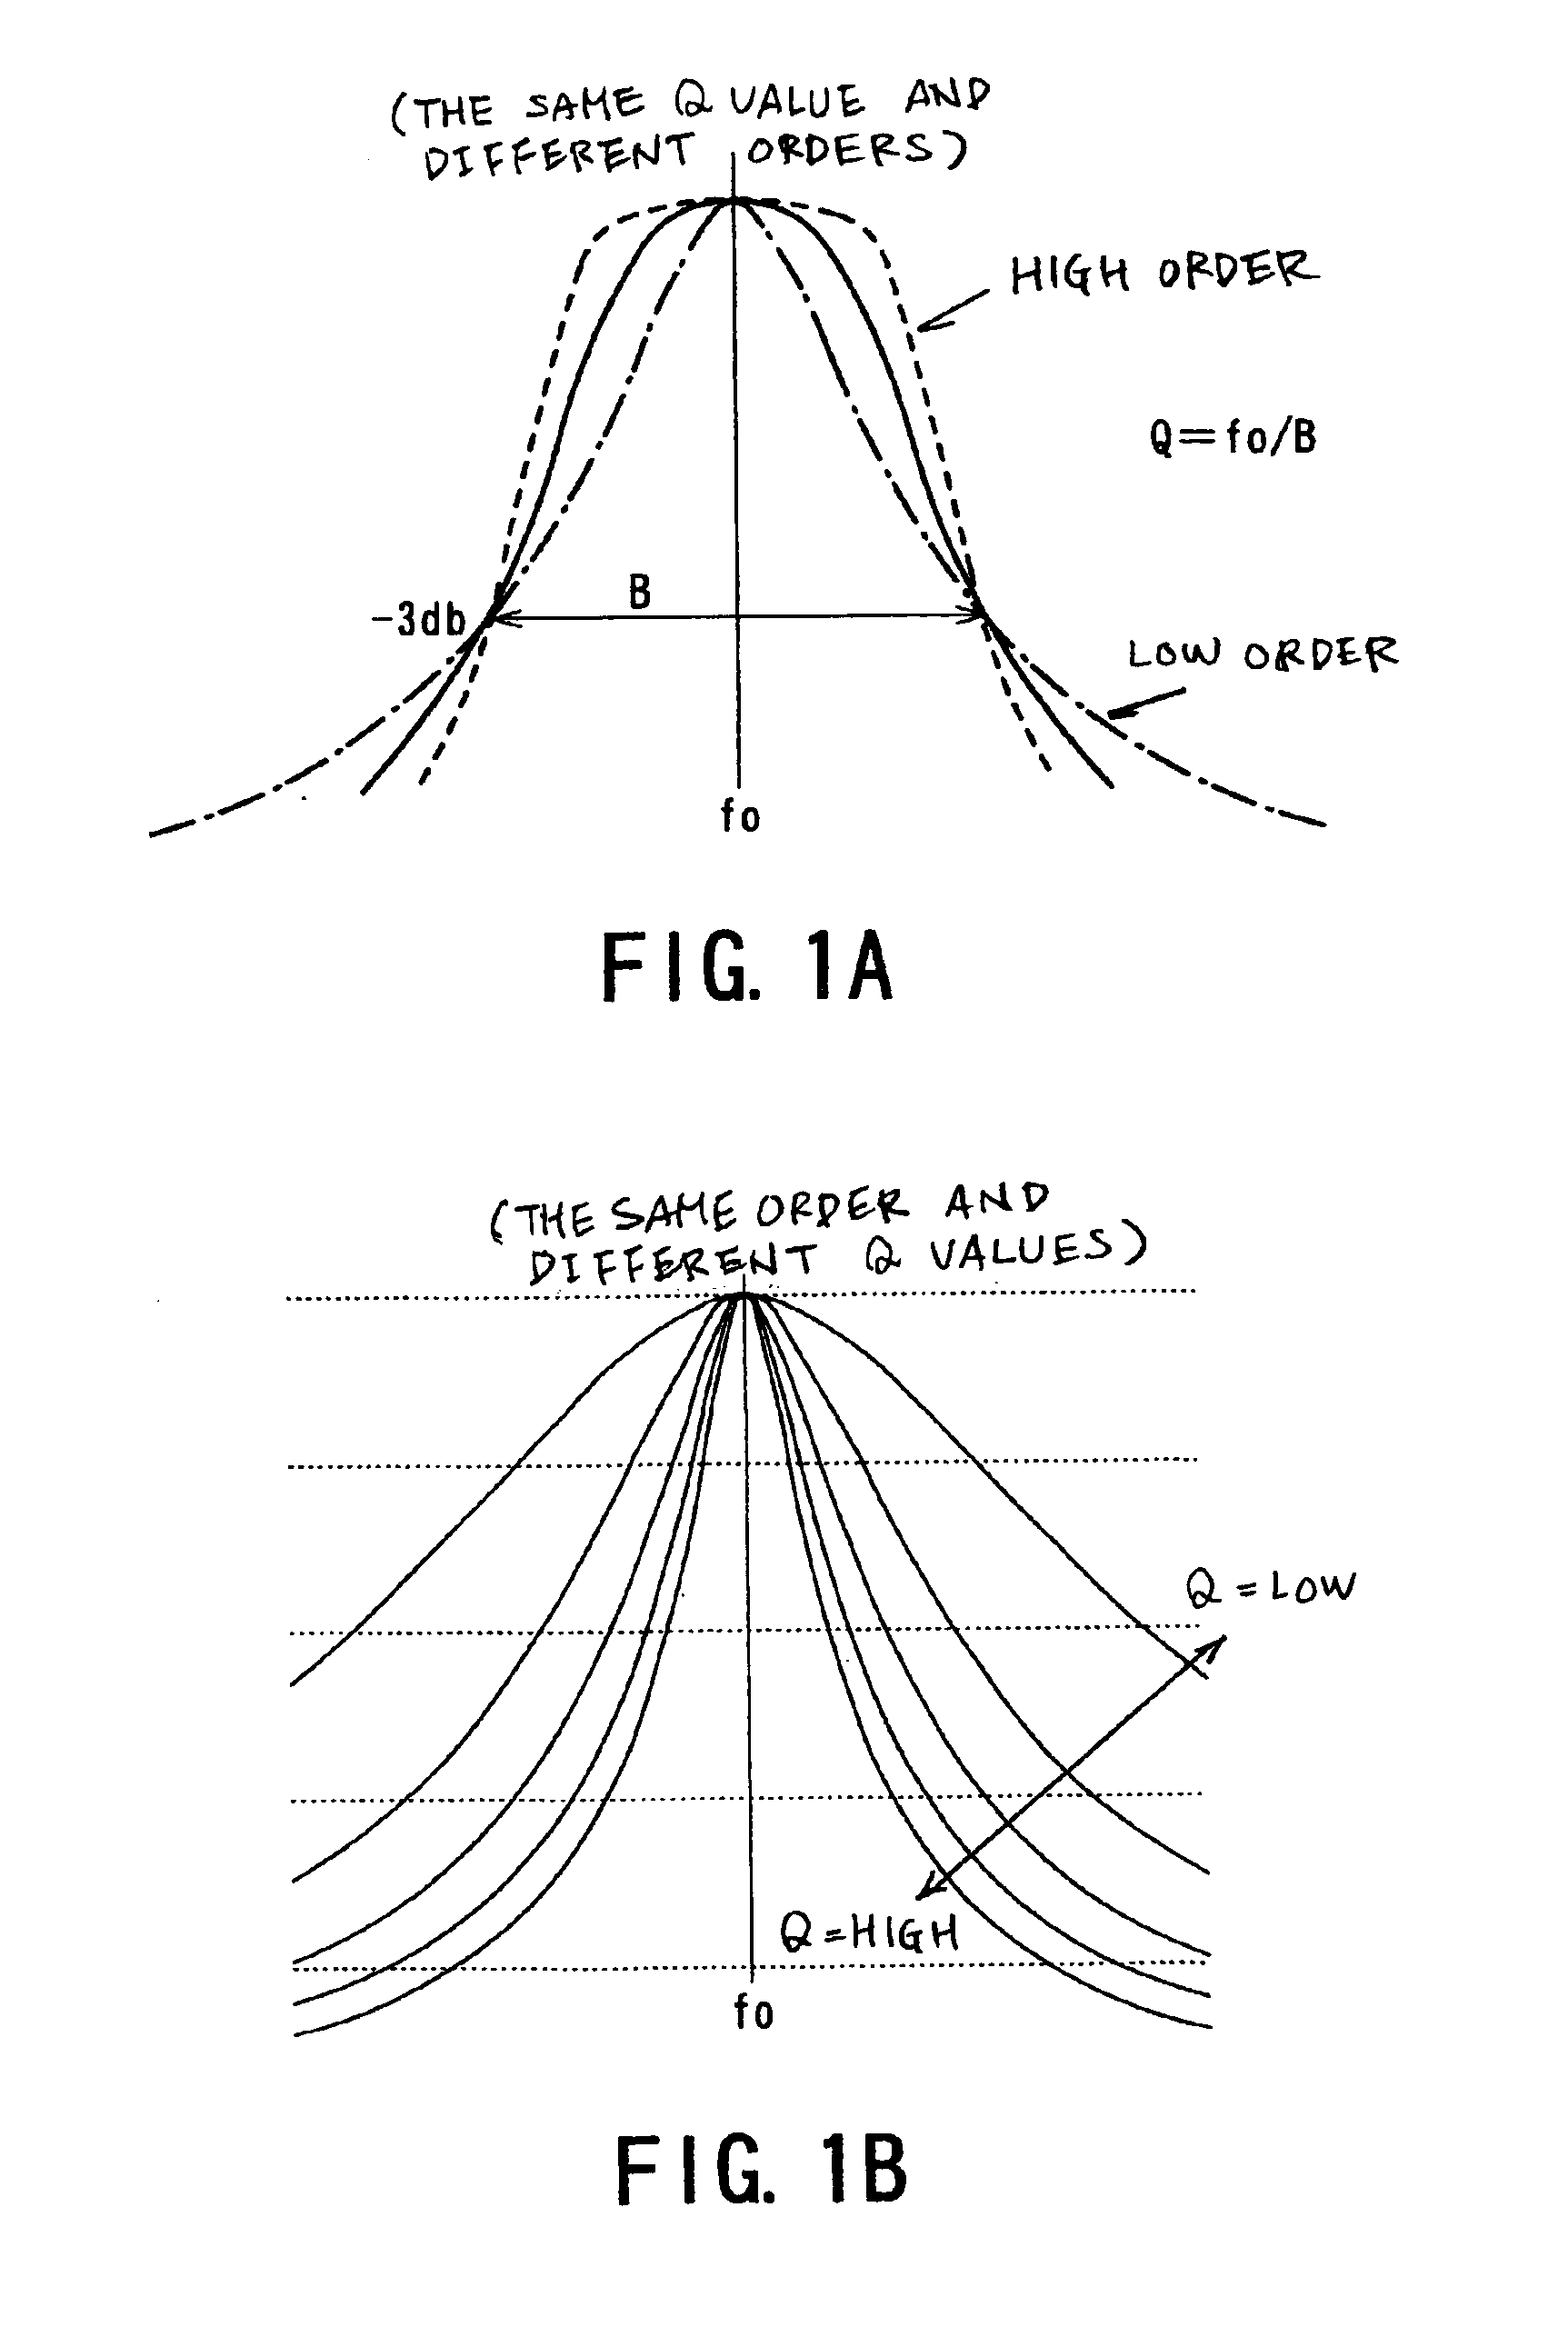 Apparatus for detecting knocking of internal combustion